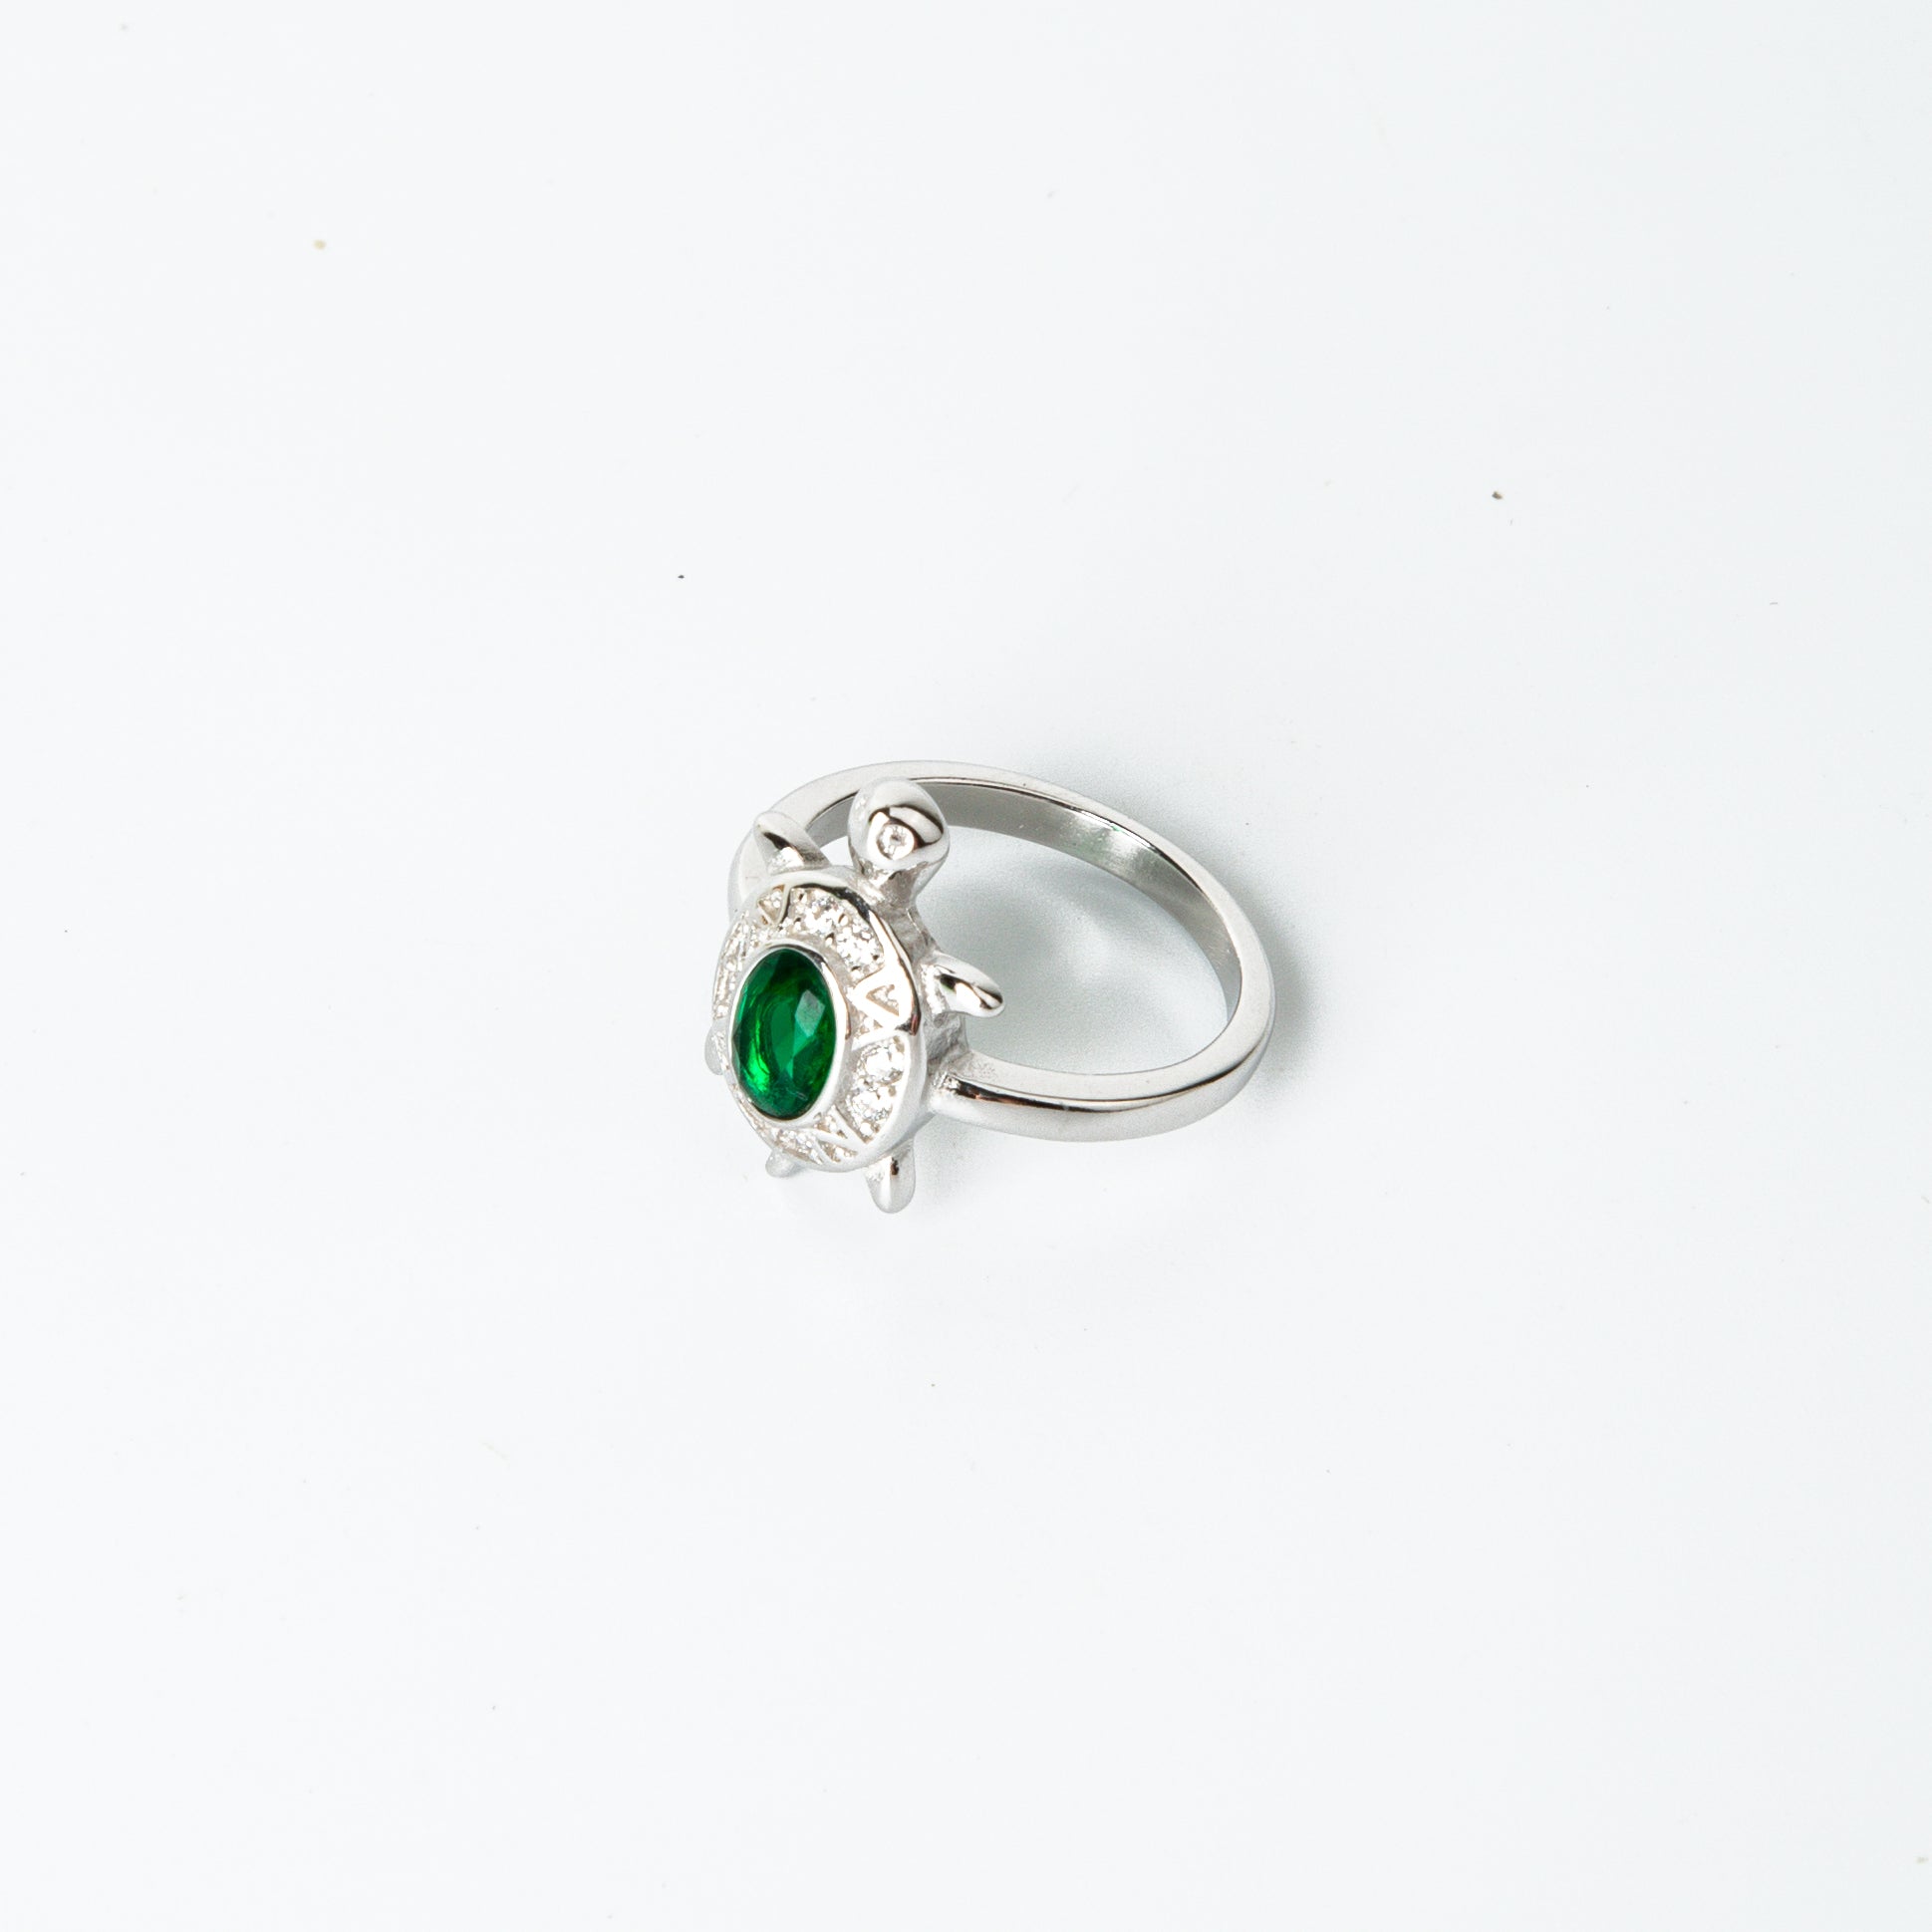 The Colourful Oval Gem Turtle Ring